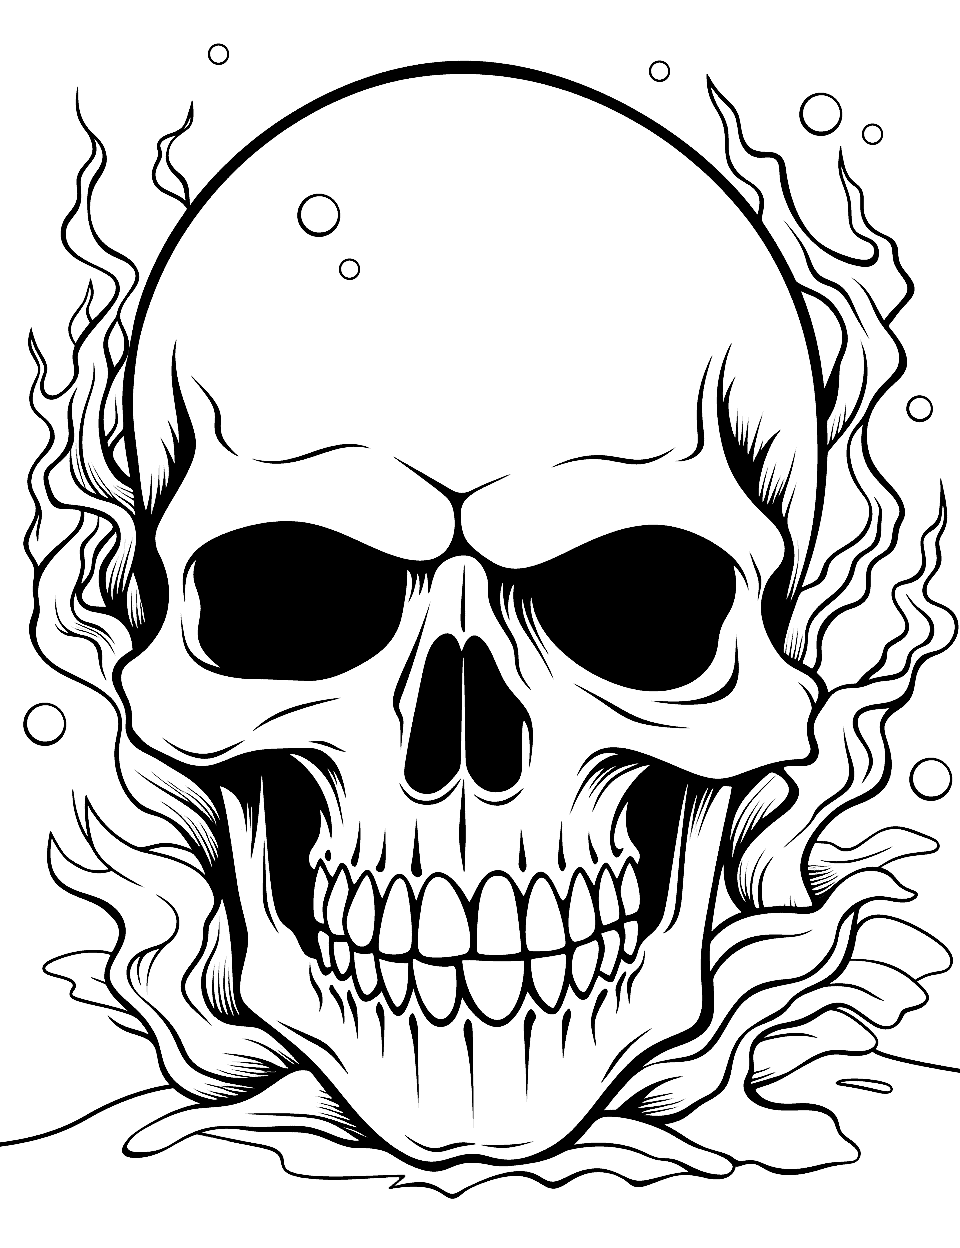 Underwater Skull Coloring Page - A skull submerged among coral reefs.